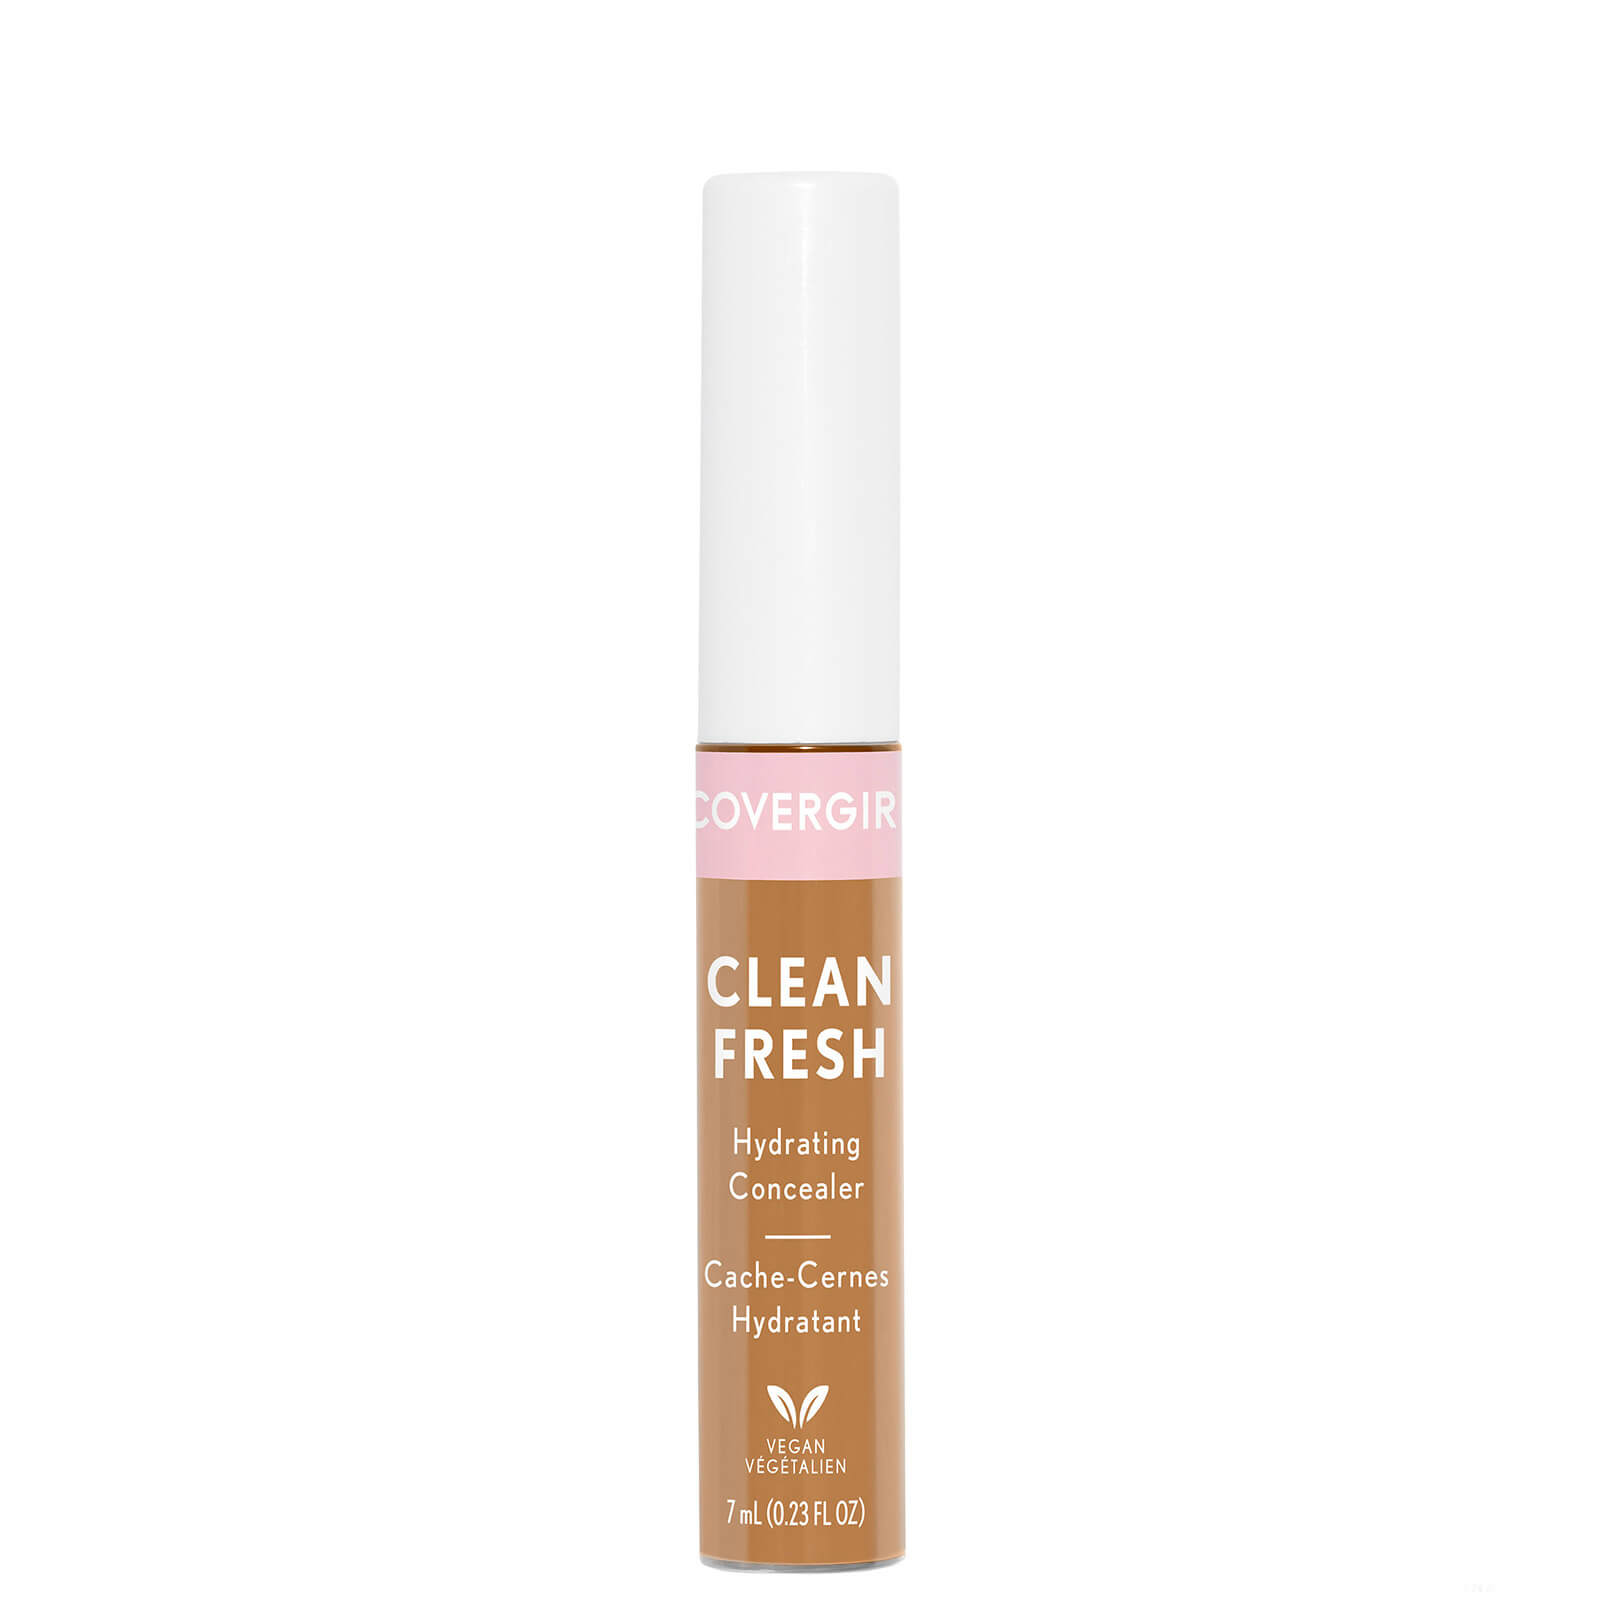 Covergirl Clean Fresh Hydrating Concealer 0.23 oz (Various Shades) - Tan